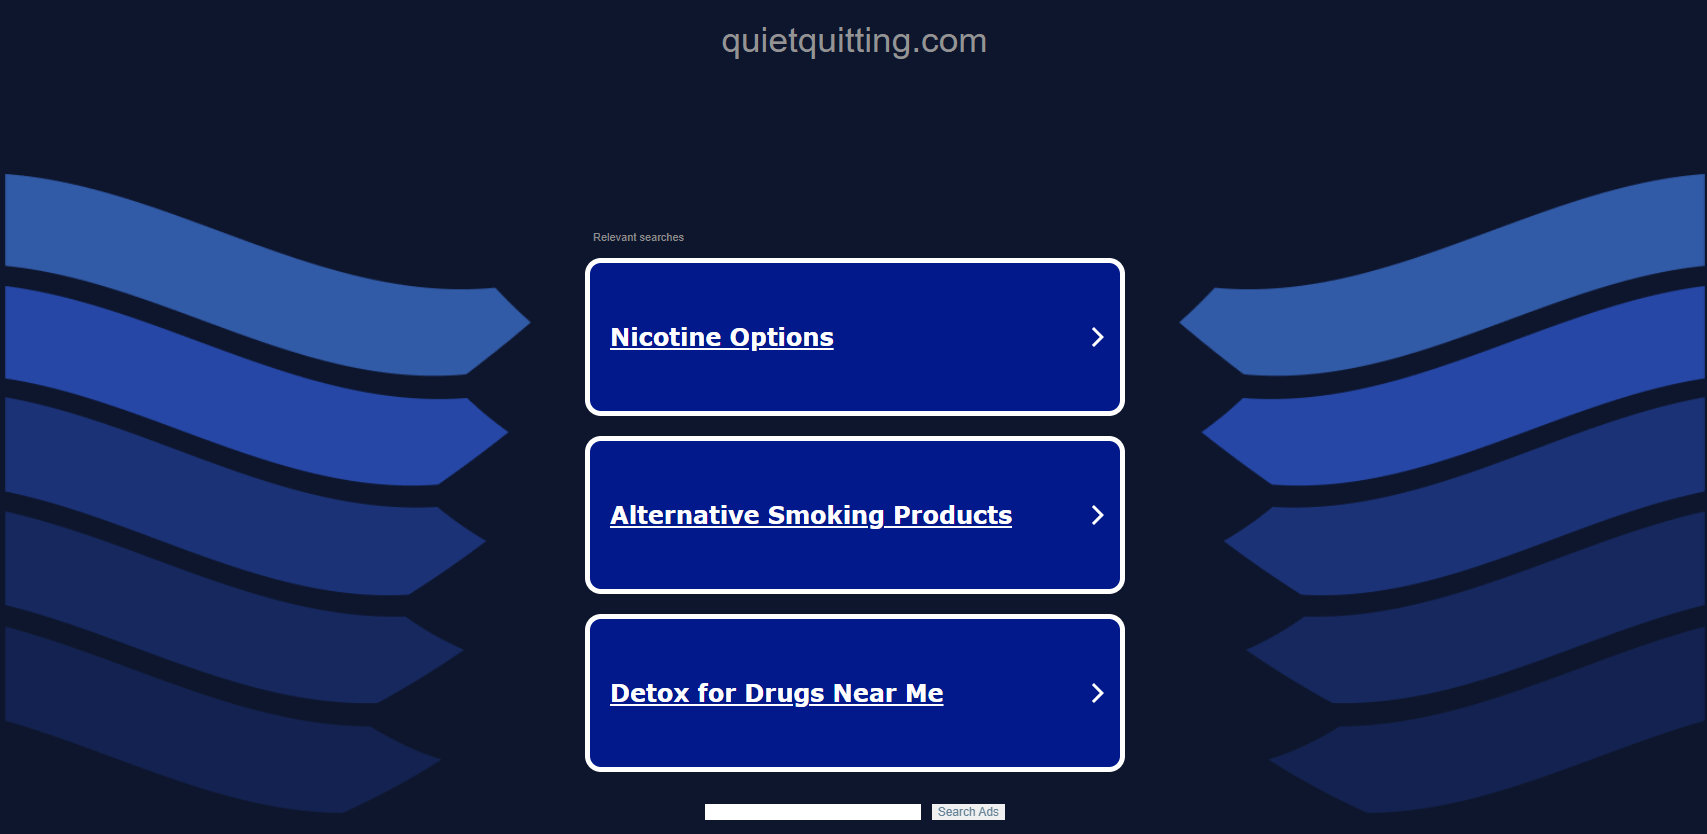 You can end up at a parked domain if you accidentally add a URL extension to a keyword, like “quietquitting.com.”